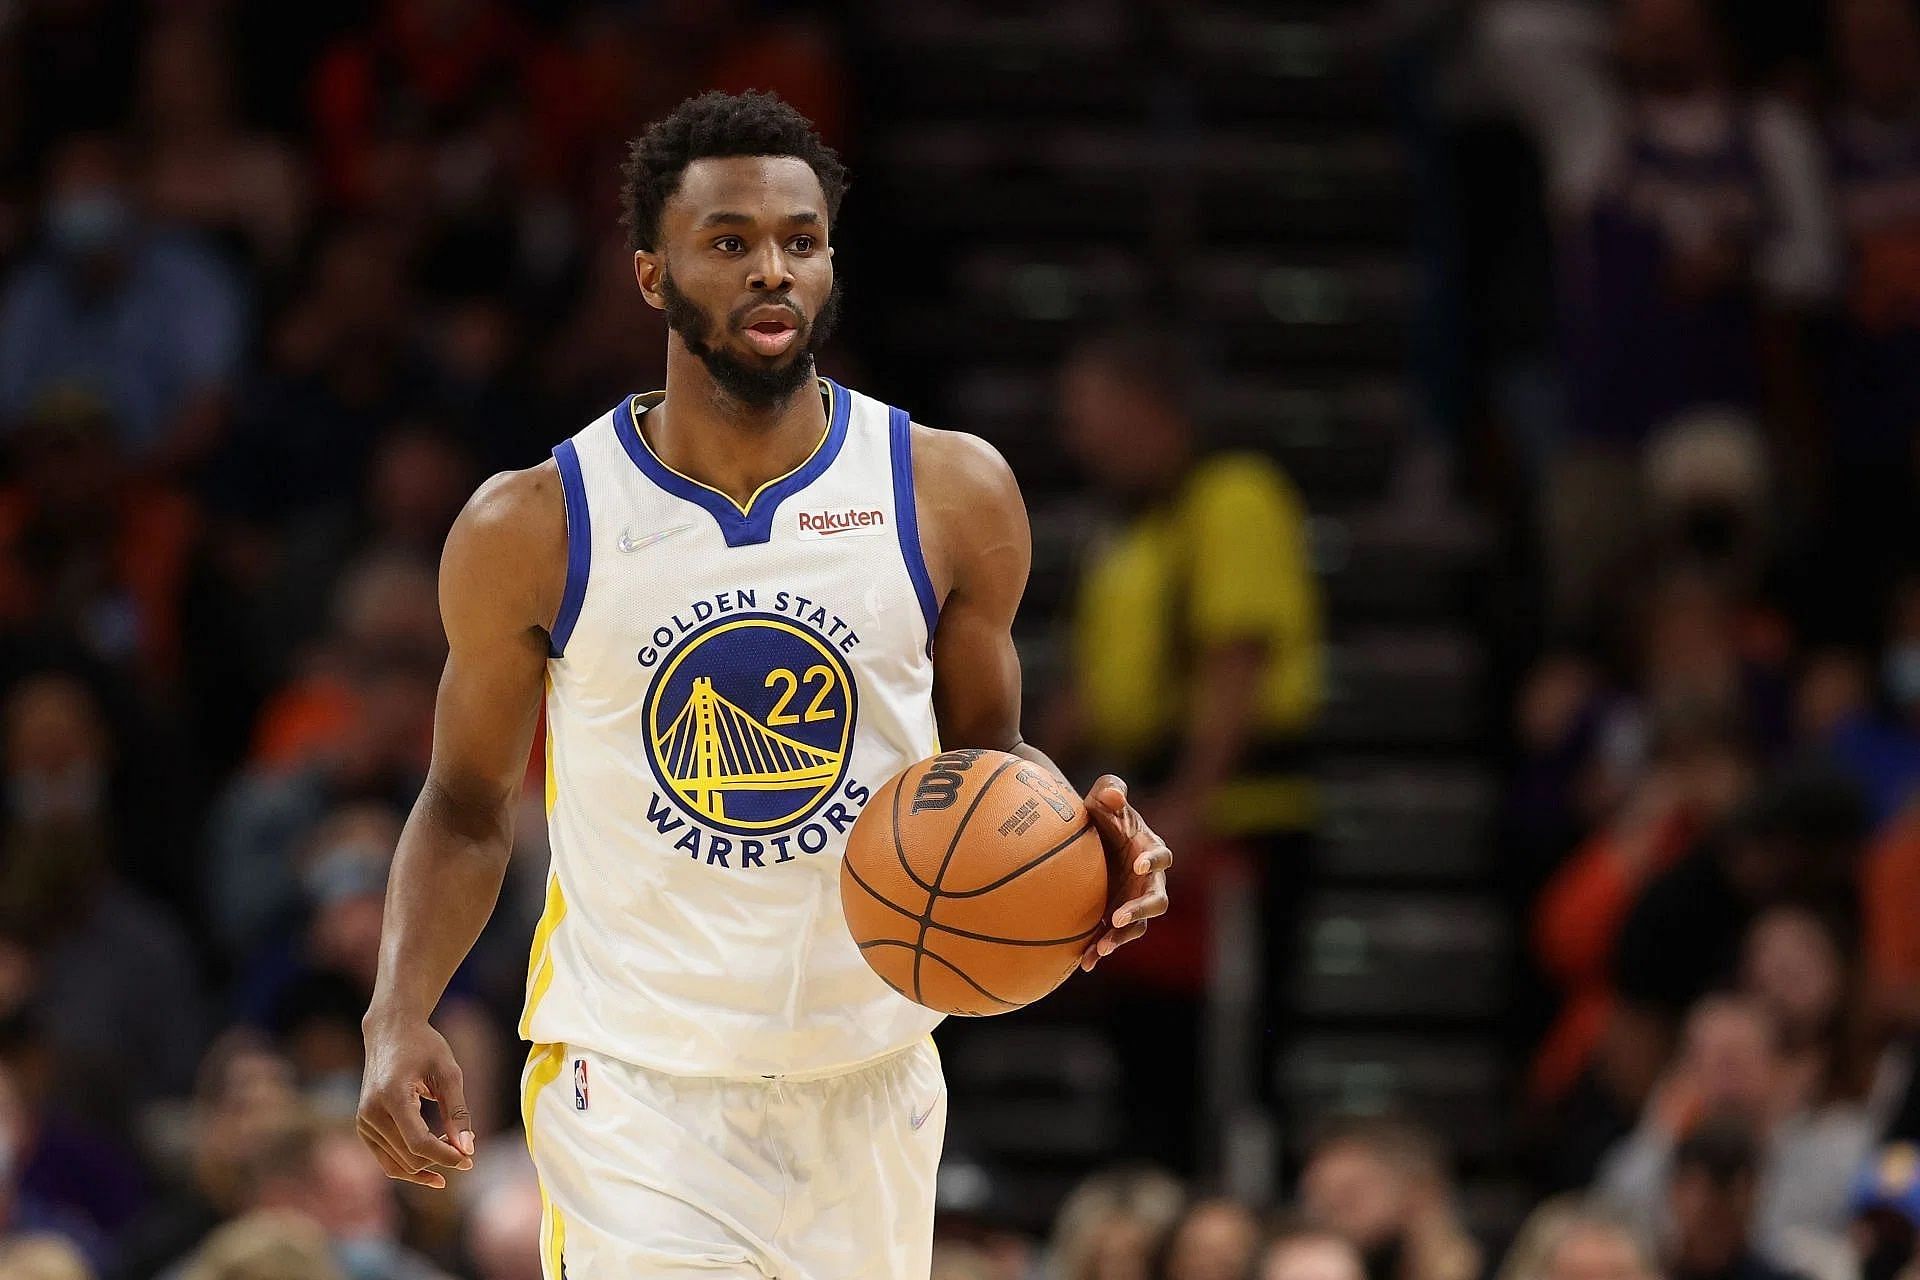 Golden State Warriors forward Andrew Wiggins wants to be an NBA All-Star this season.